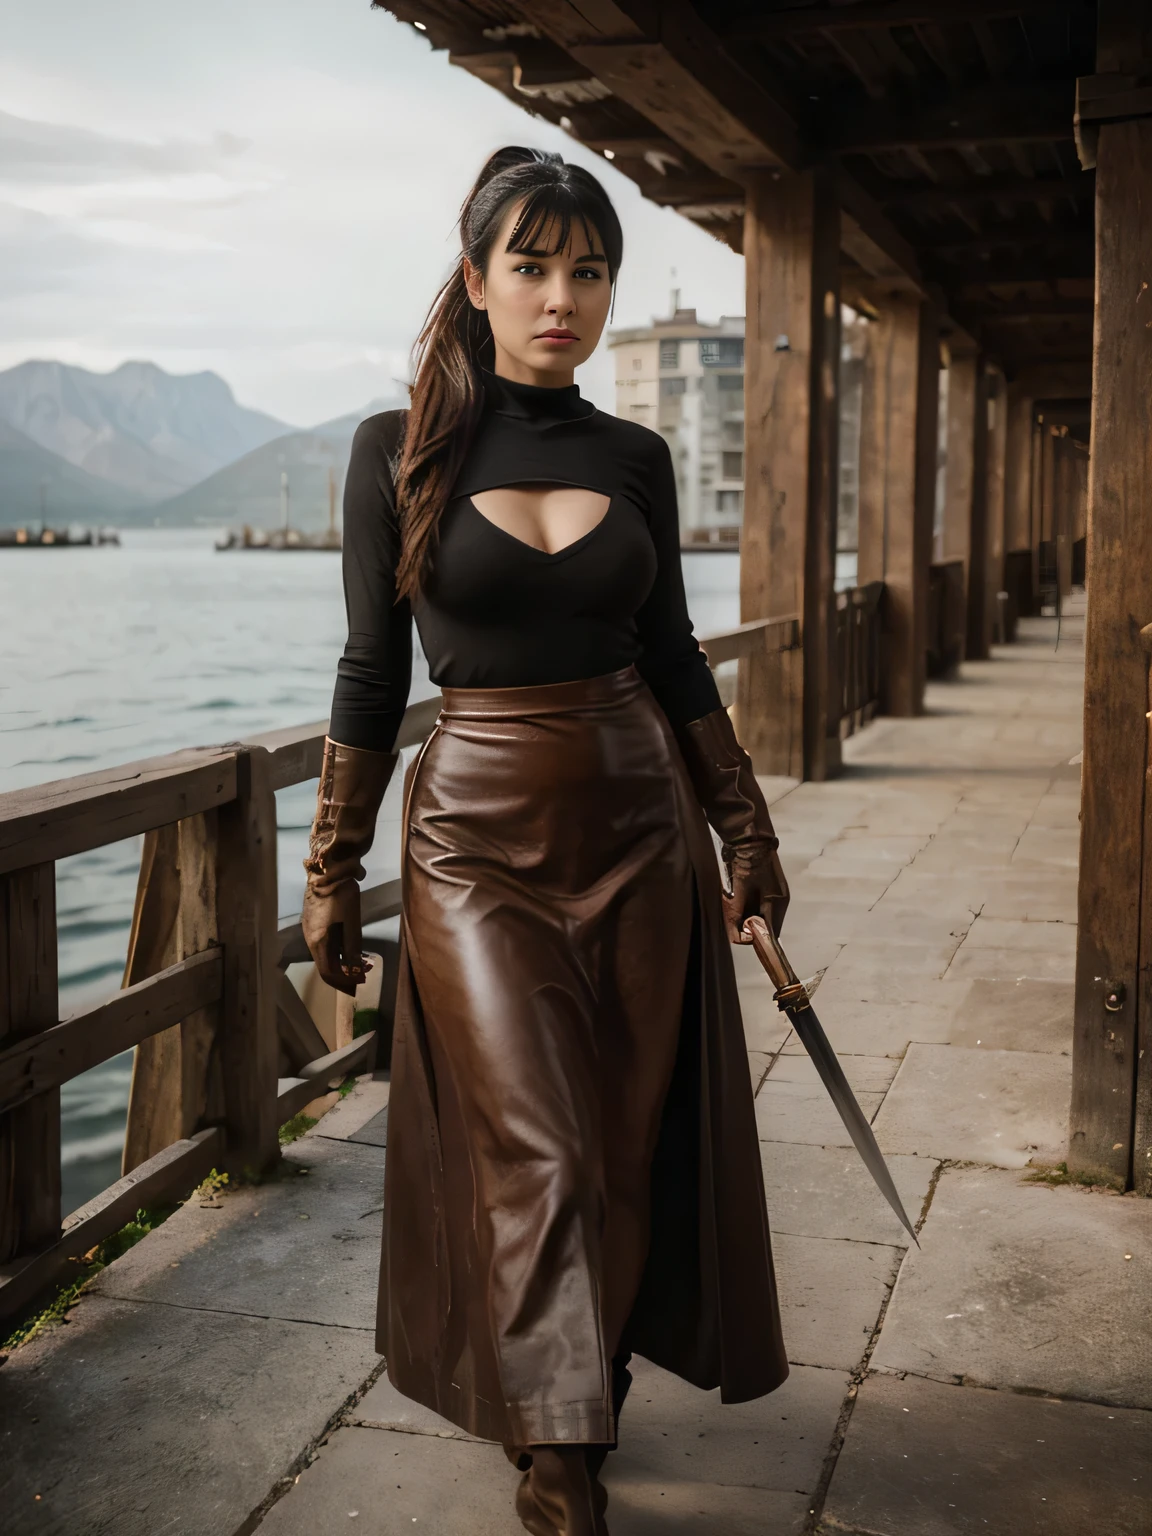 ((fantasy setting)), (old fashioned), (realistic), (facing camera), (year 1400), (western), 1 girl serious  Bettie Page , black ponytail hair, standing on pier, relaxed, 20 years old, leather armor, (( brown leather gloves)) Brown long maxi-skirt(black long maxi-skirt:1.2 , busy surroundings, brown coat, holding a sword in one hand, flirting with the camera, she's angry with someone,